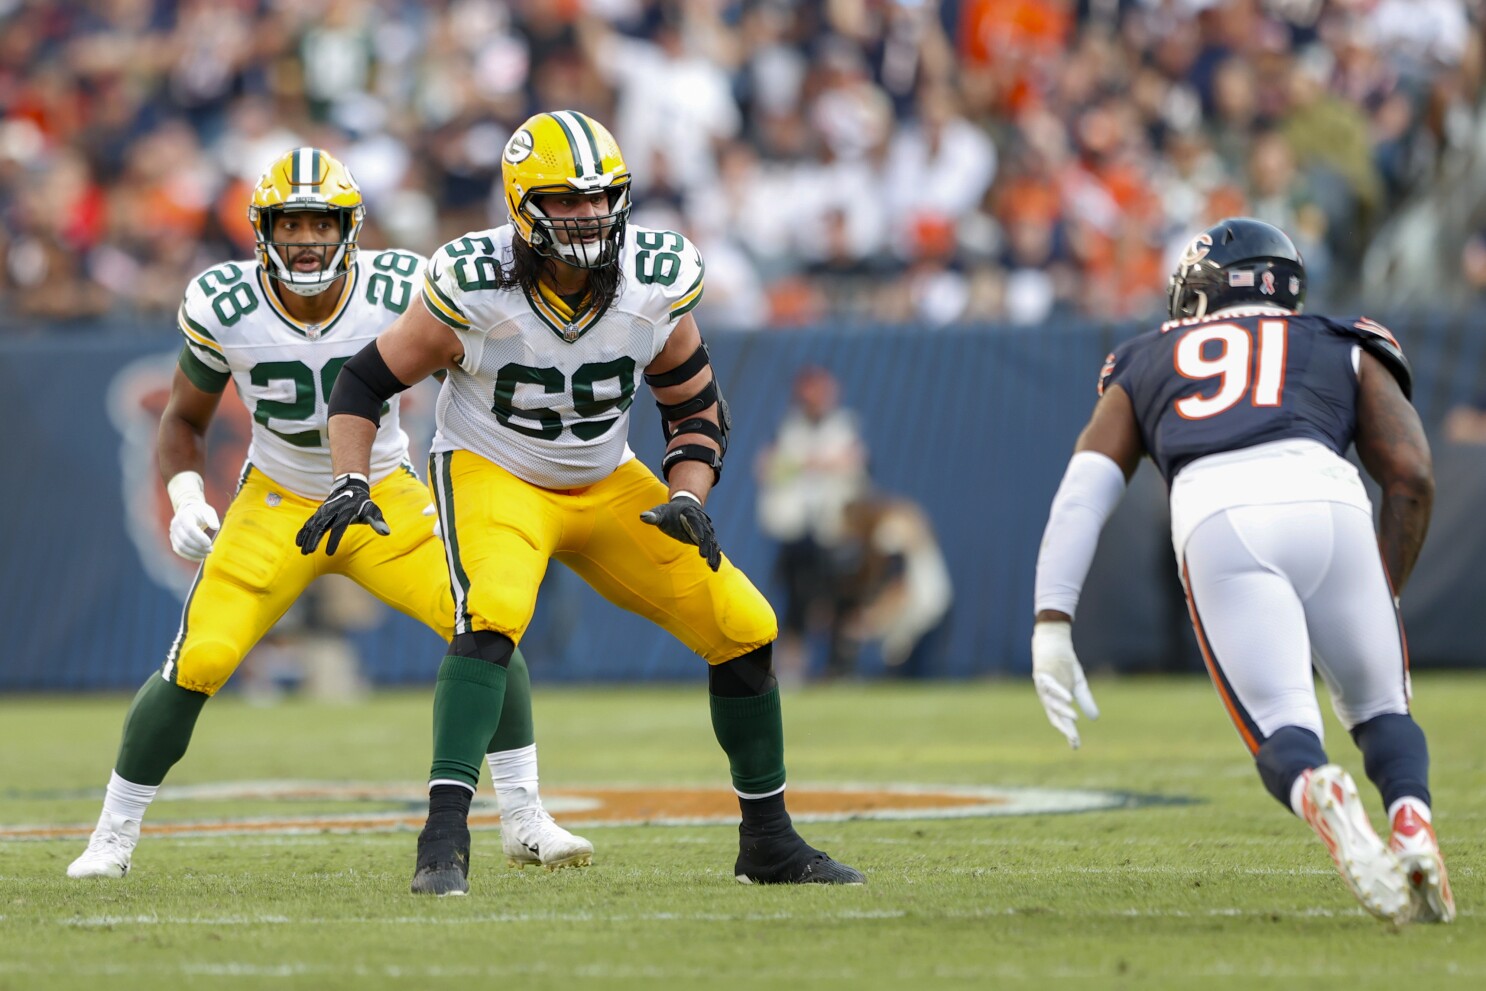 Packers place offensive tackle Bakhtiari on injured reserve as he